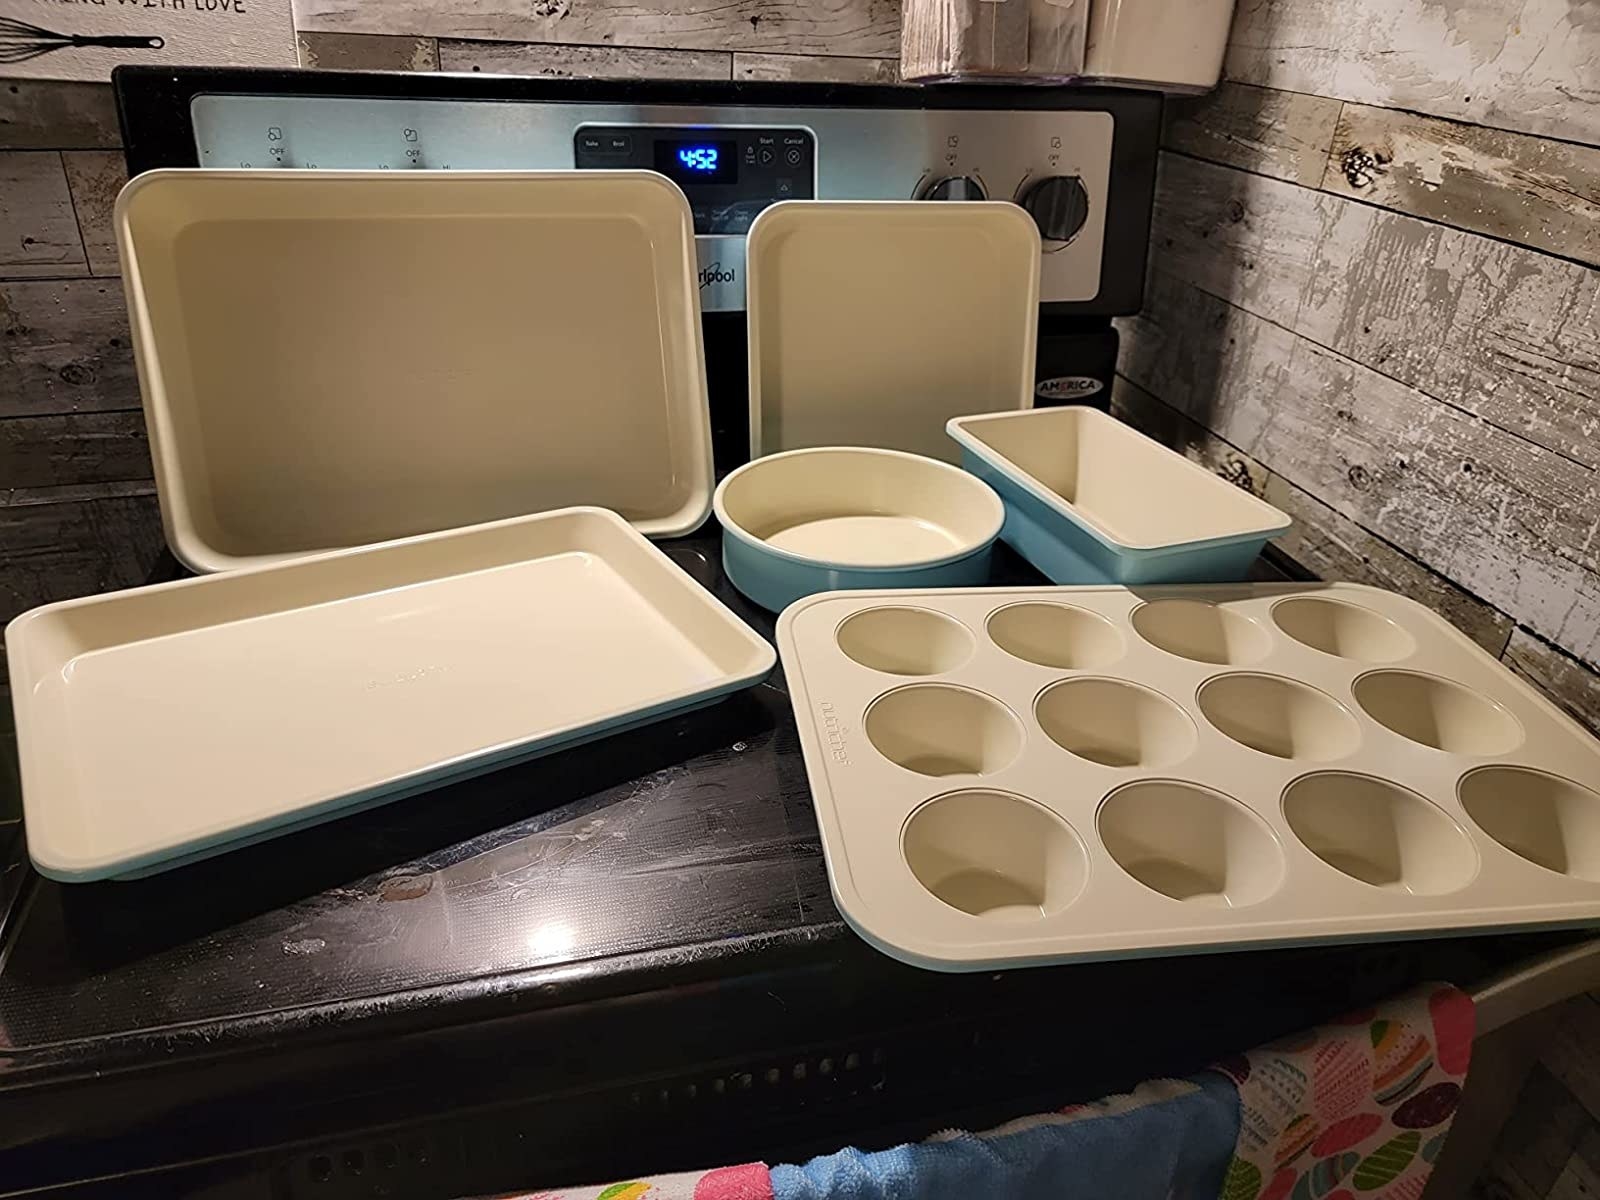 Reviewer image of six baking pans